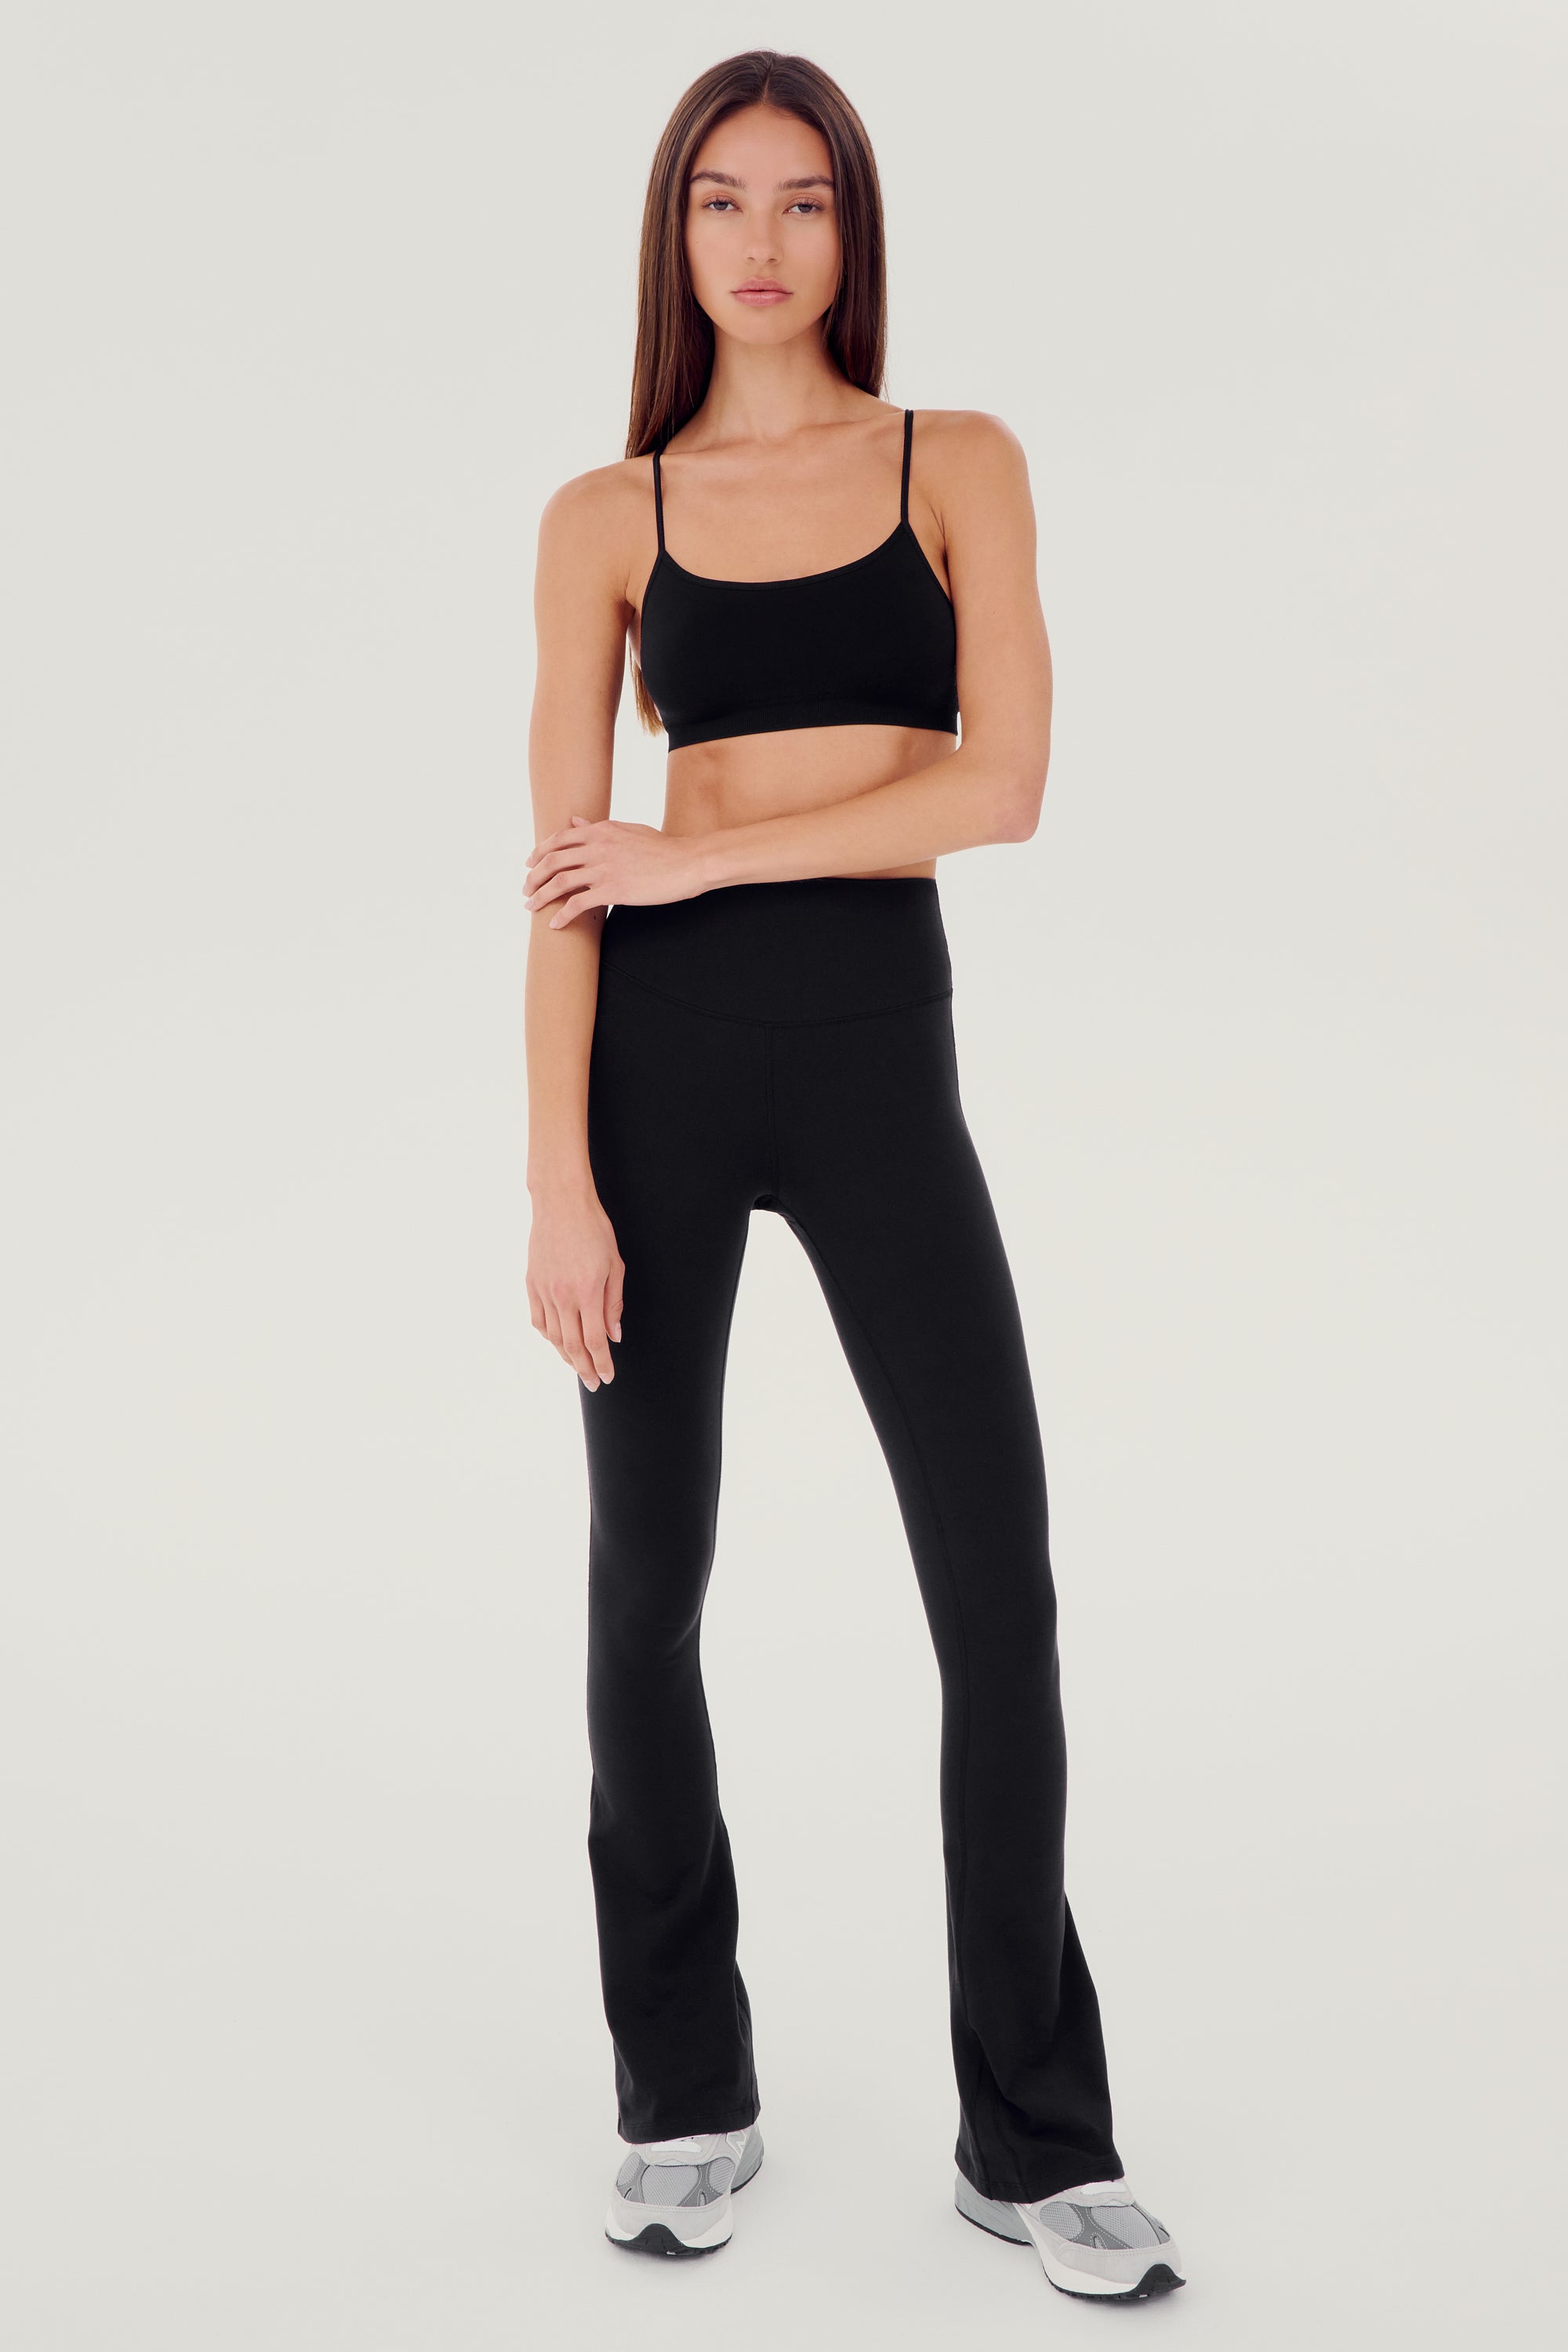 Splits59 Raquel Flare Performance Leggings, TikTokers Officially Brought  Back Flared Yoga Pants — and We Couldn't Be Happier